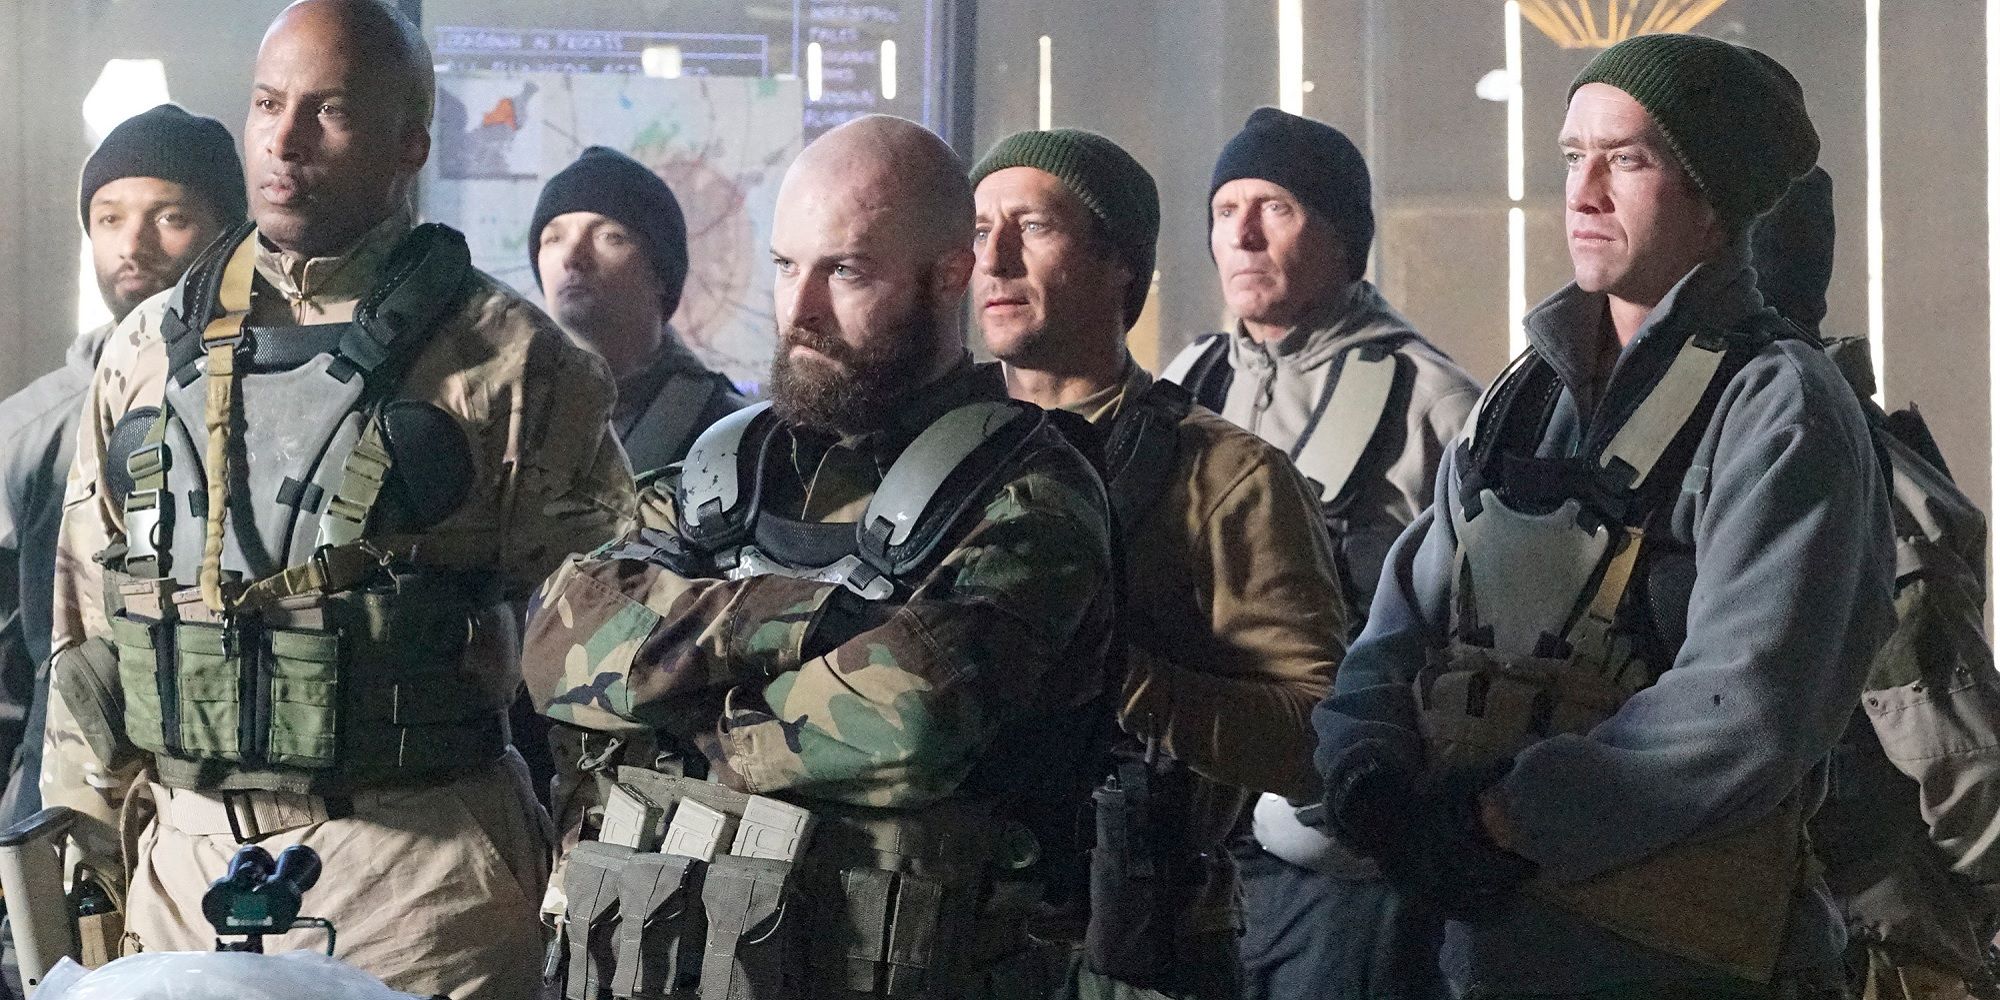 The Watchdogs in their military gear holding a meeting in Agents Of Shield